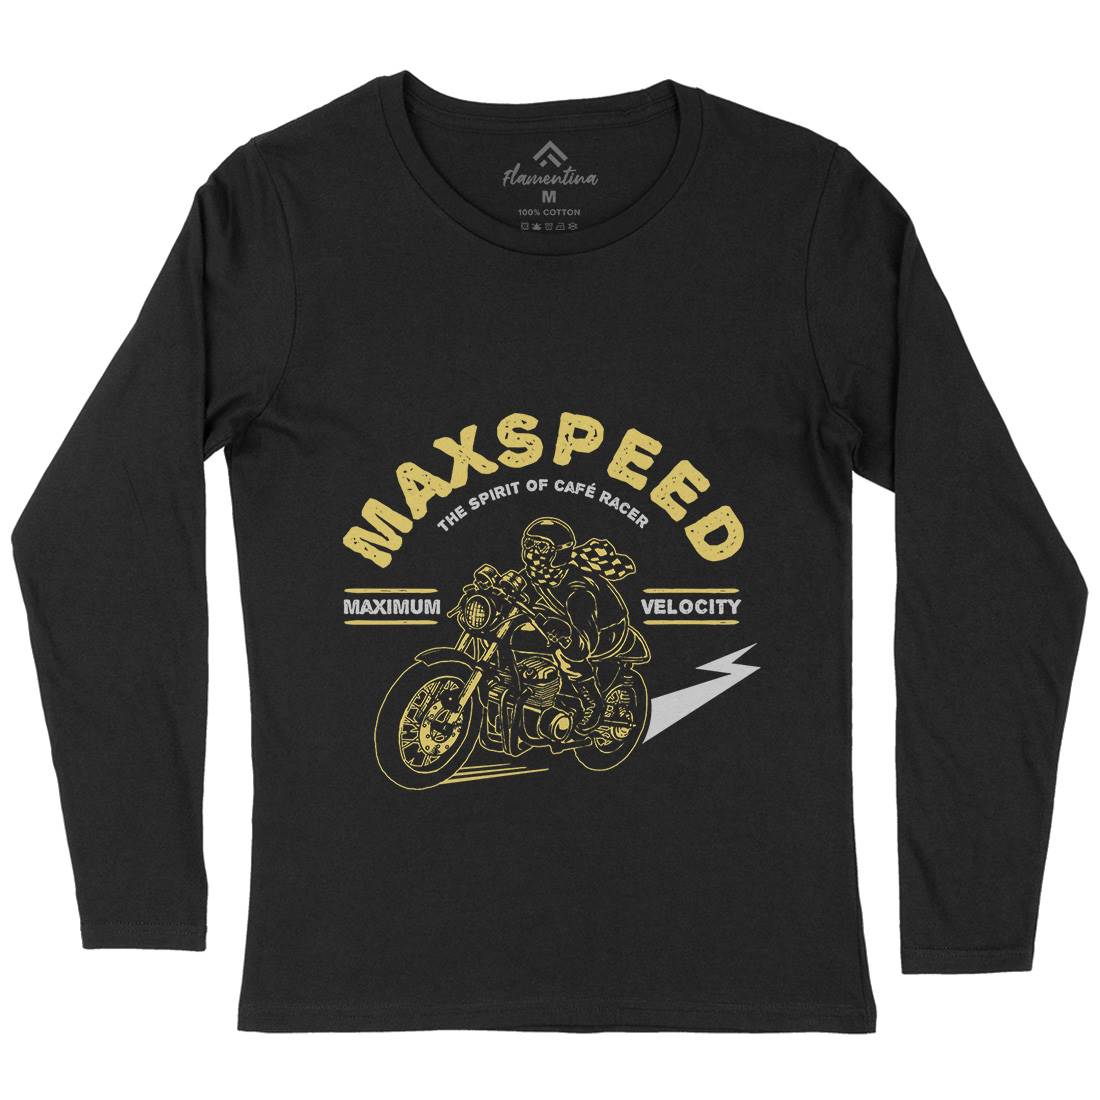 Max Speed Womens Long Sleeve T-Shirt Motorcycles A343